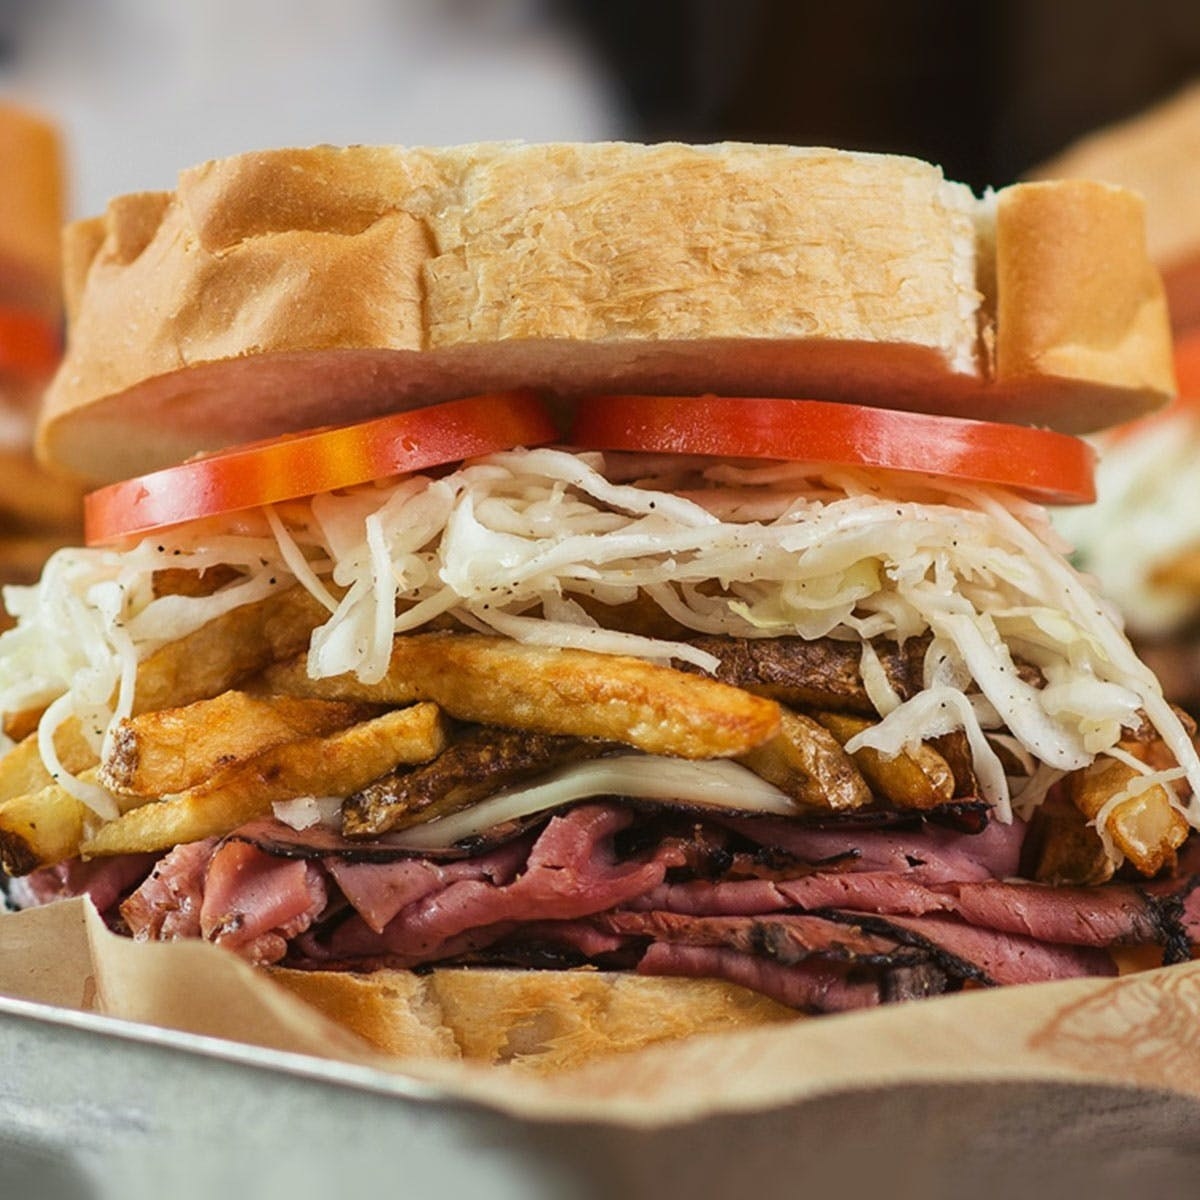 White bread stuffed with pastrami, coleslaw, fries, and sliced tomato from Primati Bros.